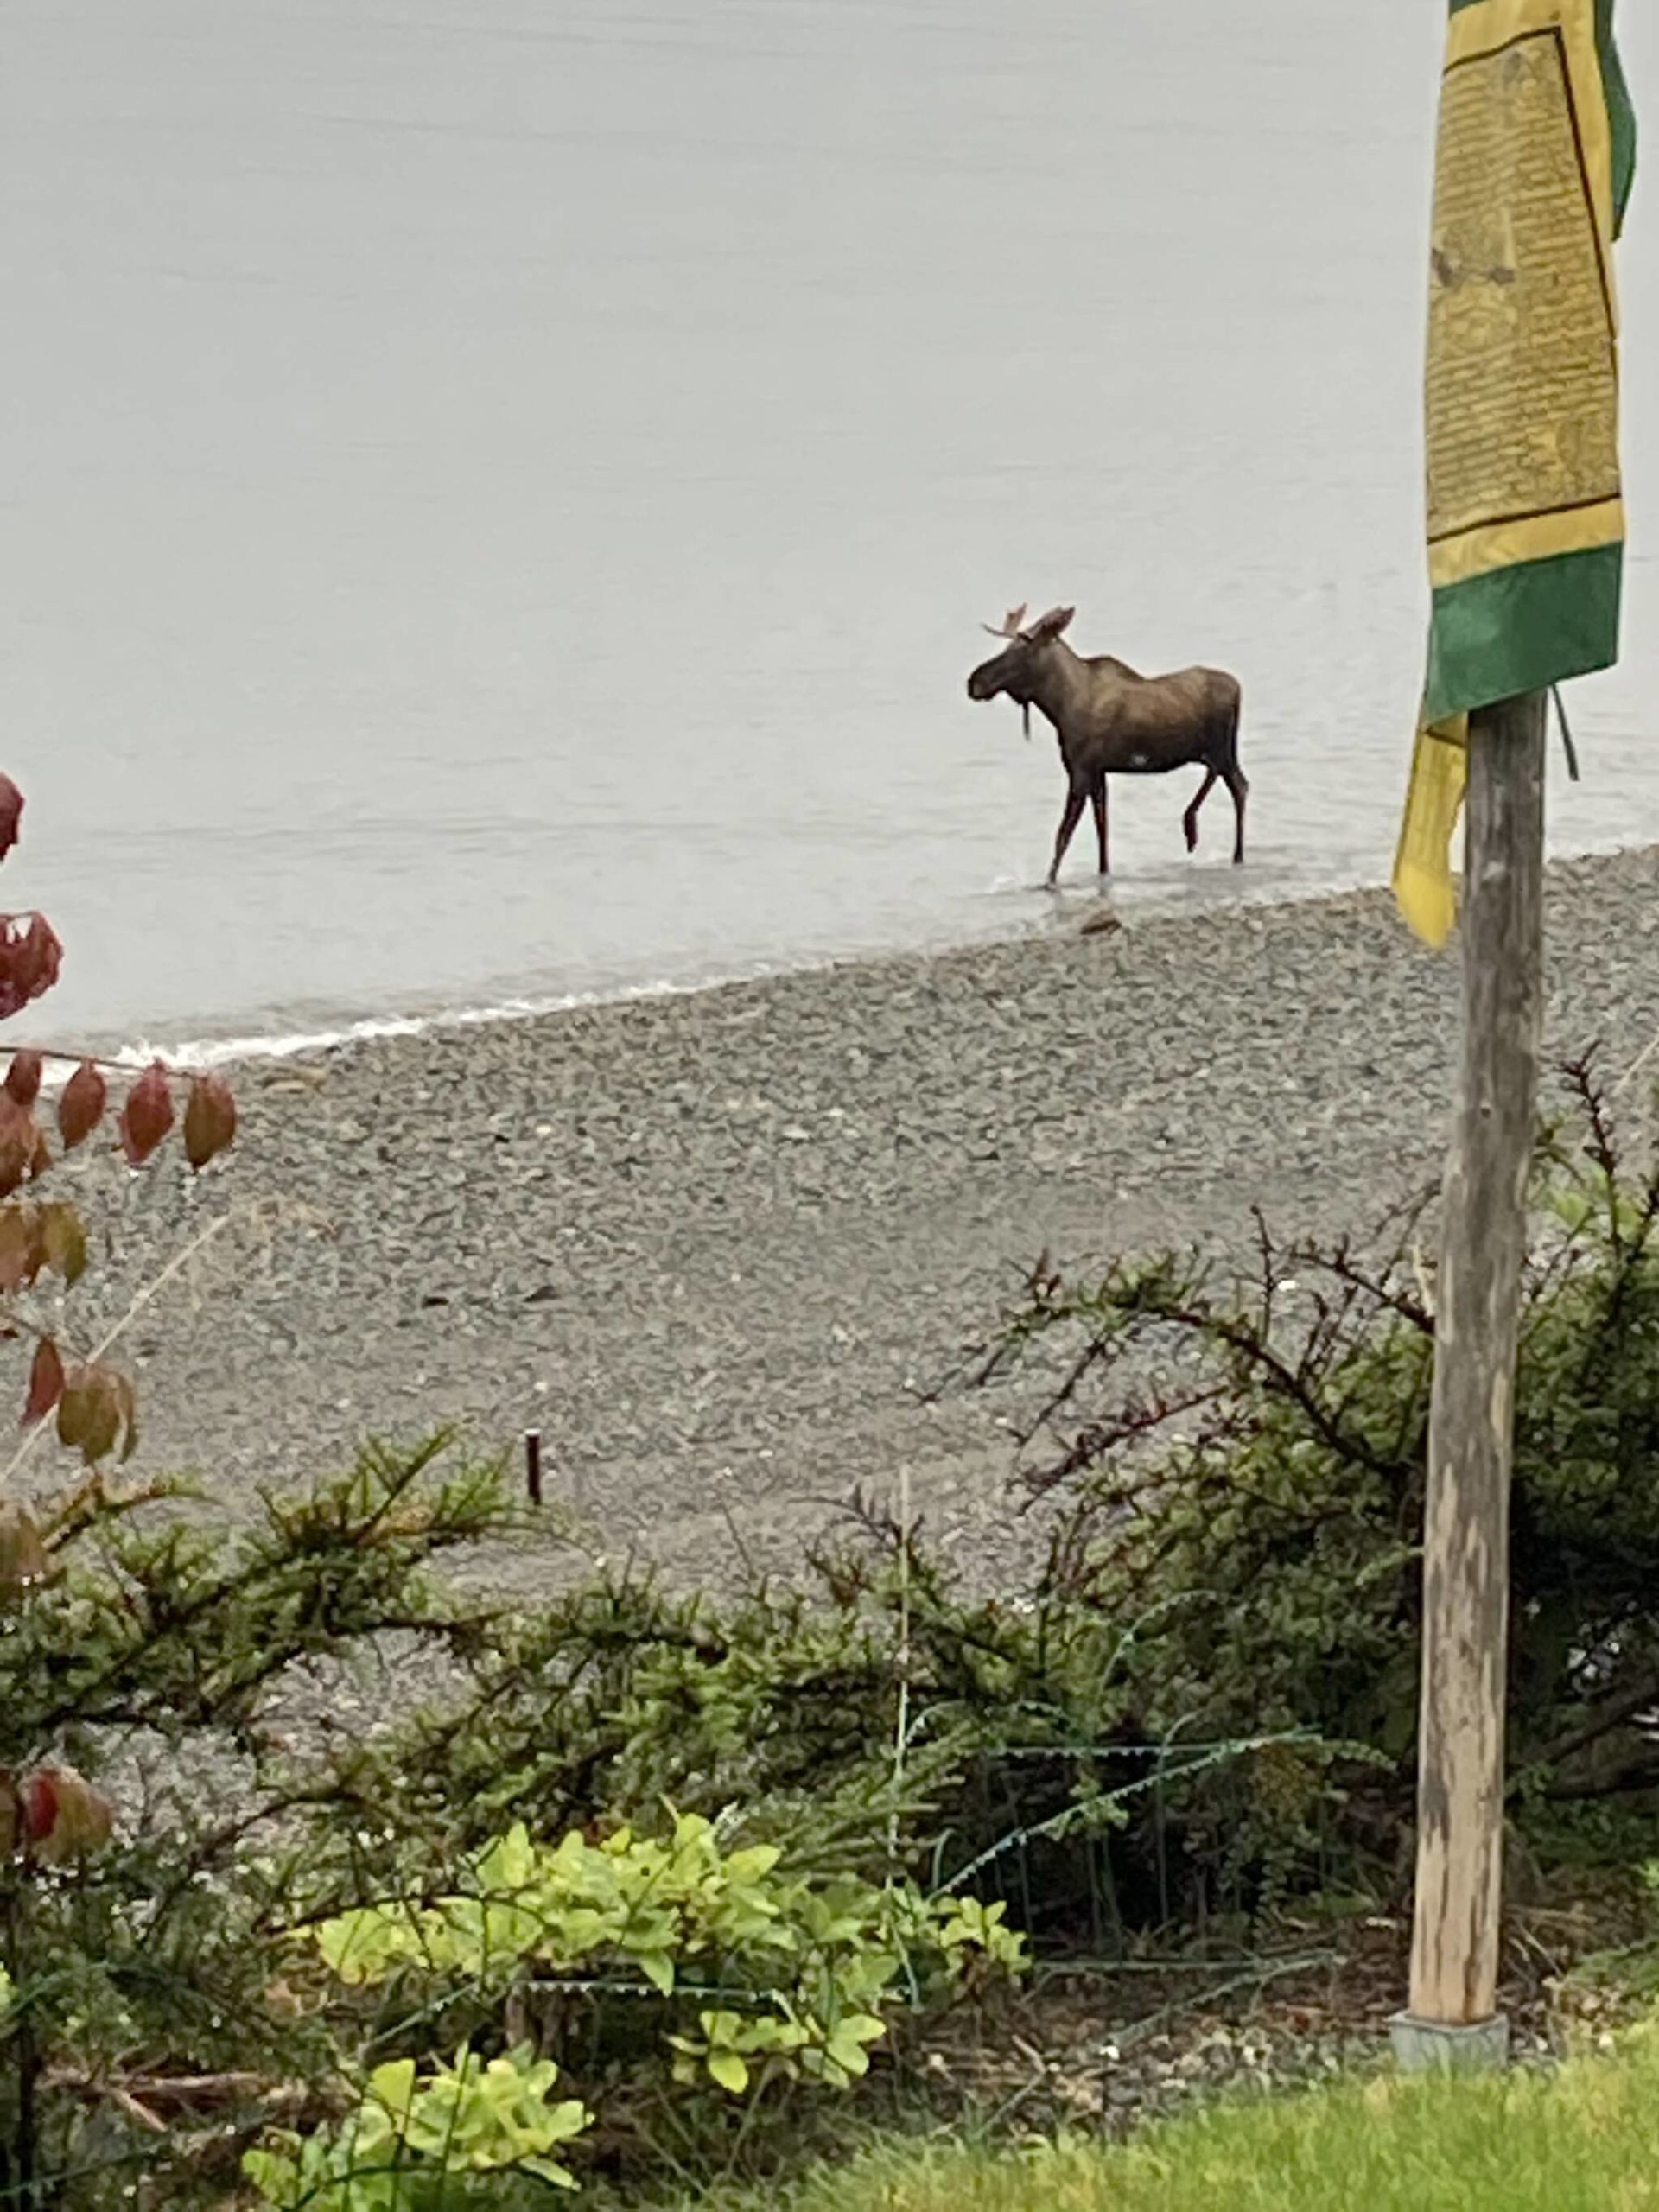 Lena Point residents spotted a moose Friday, Sept. 17, 2021, and told the Empire it swam ashore before heading in the direction of the National Oceanic and Atmospheric Administration building. (Courtesy photo/ Matt Musslewhite)